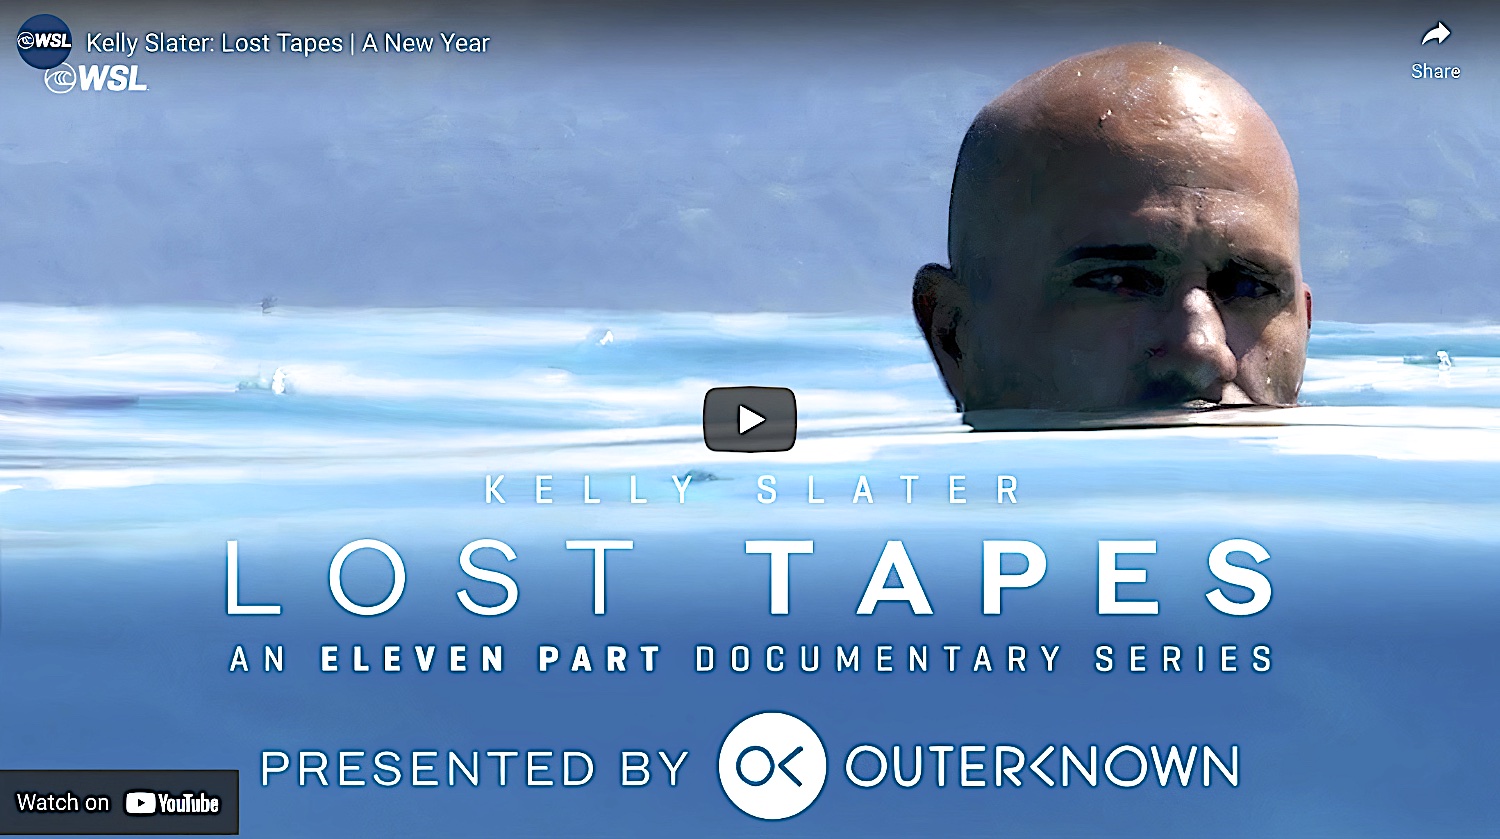 Kelly slater lost tapes